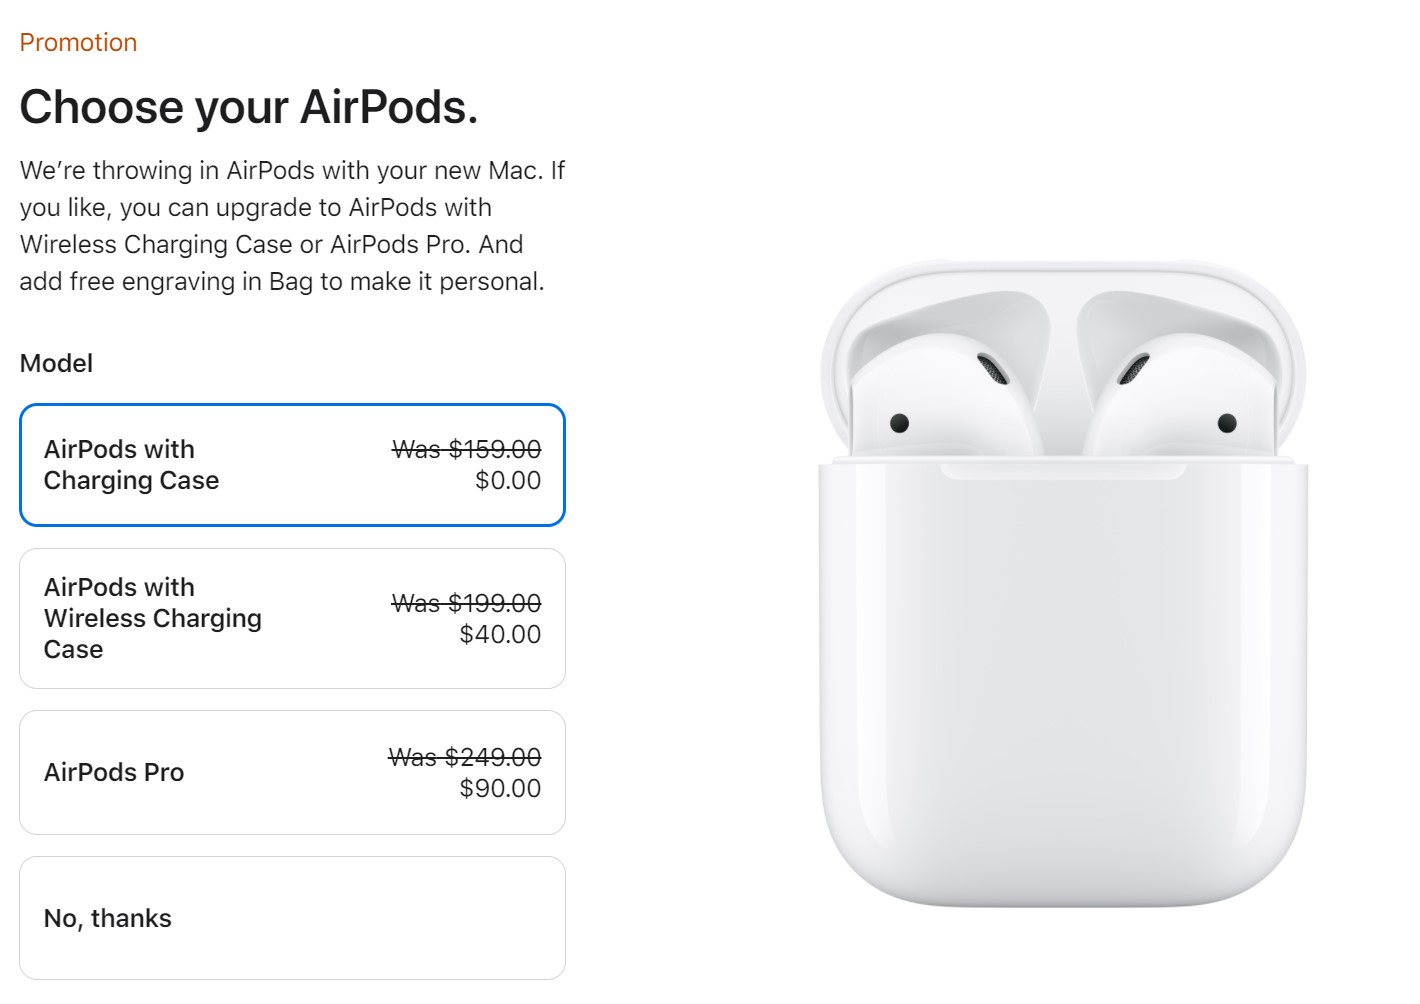 apple student pricing requirements